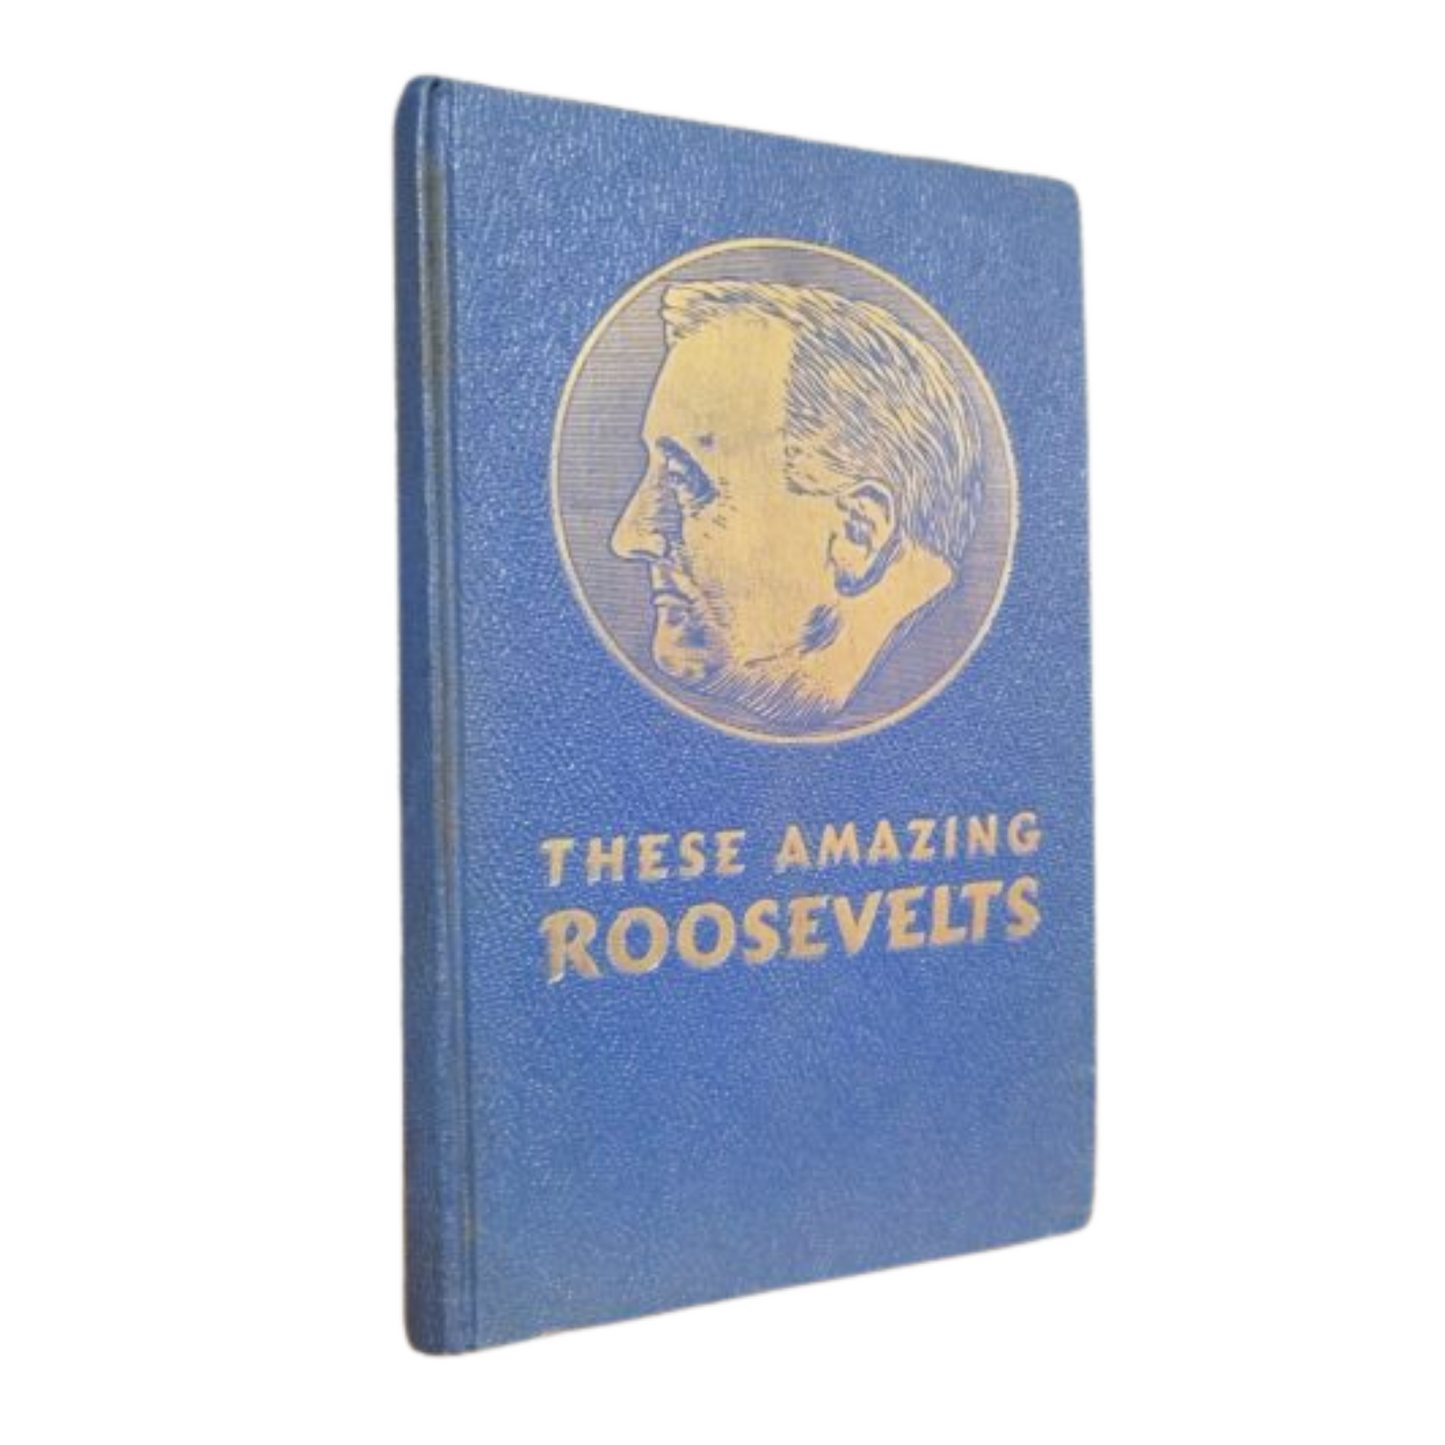 These Amazing Roosevelts by Dr. William L. Stidger - 1938